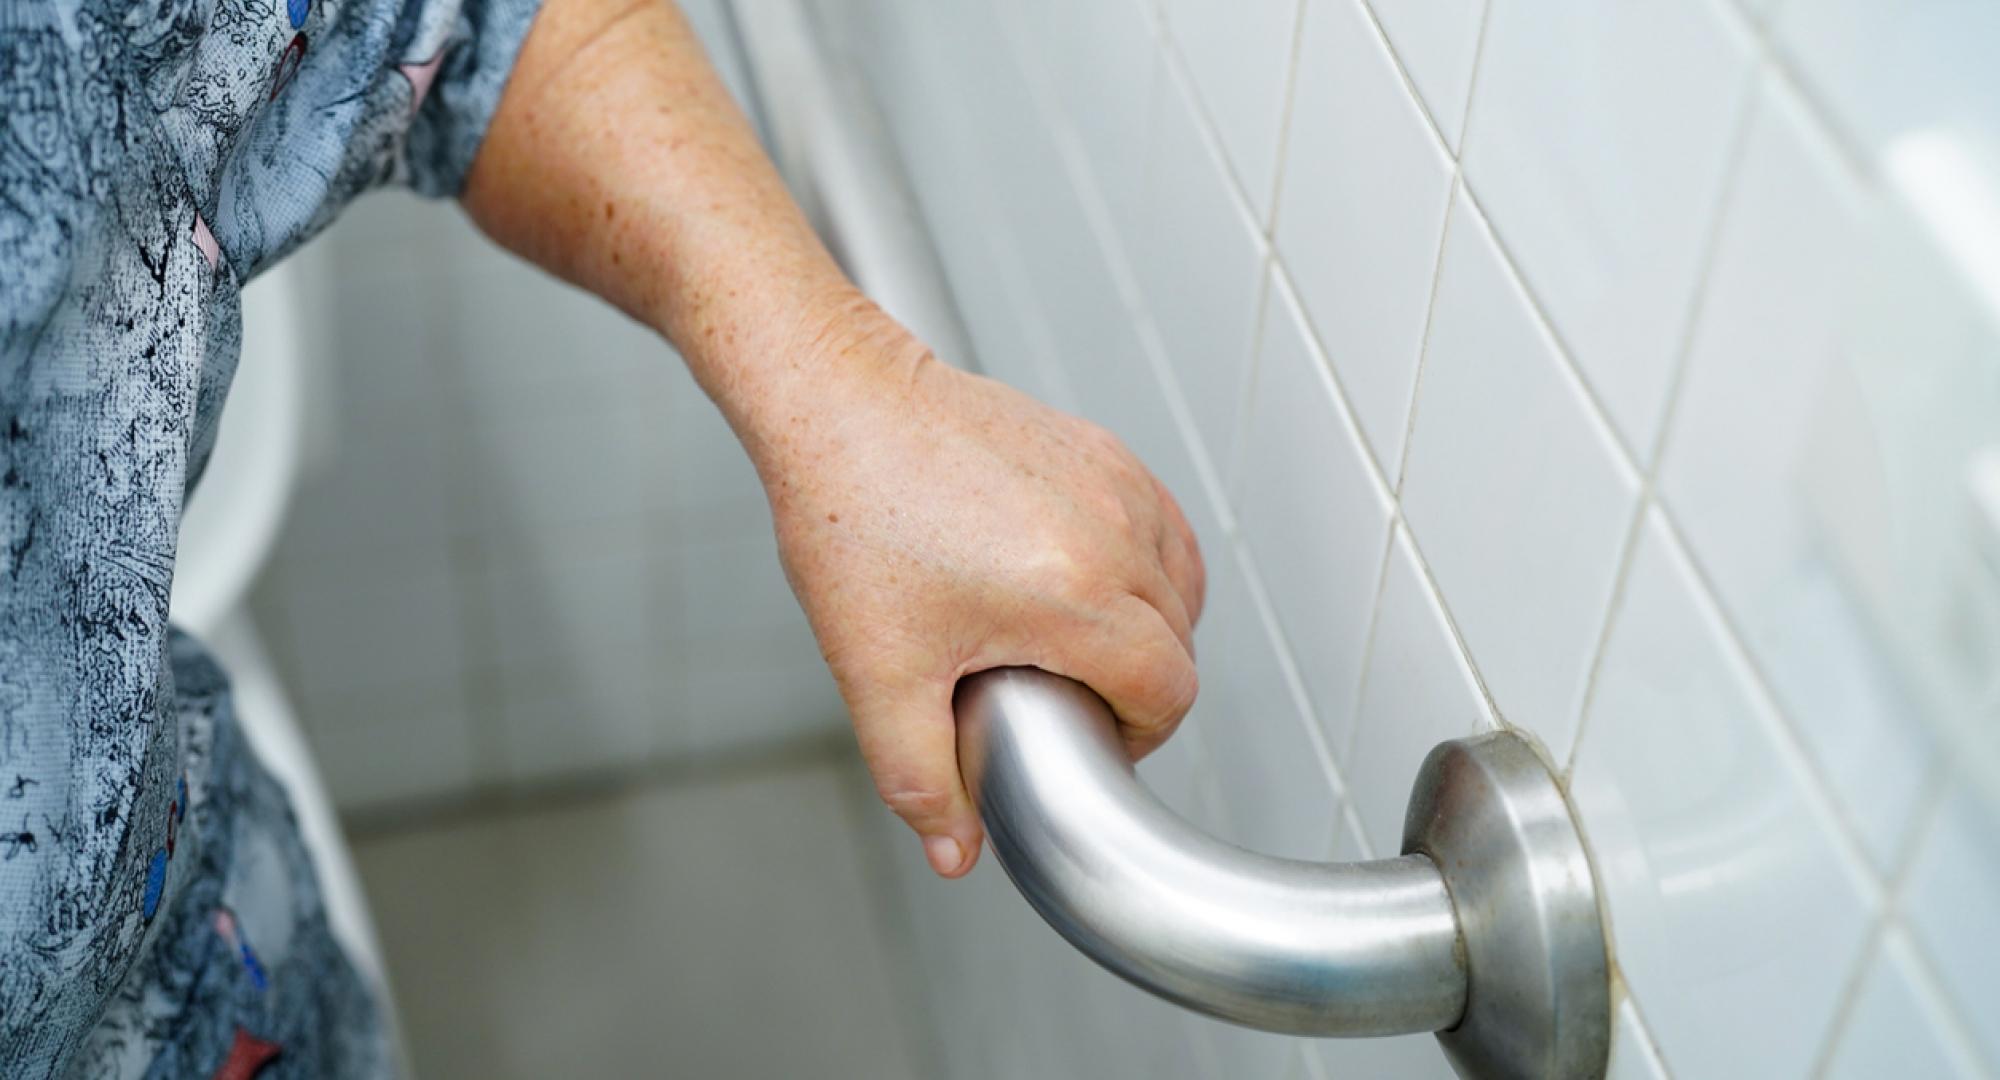 A disabled elderly woman using a handrail to steady herself in the toilet